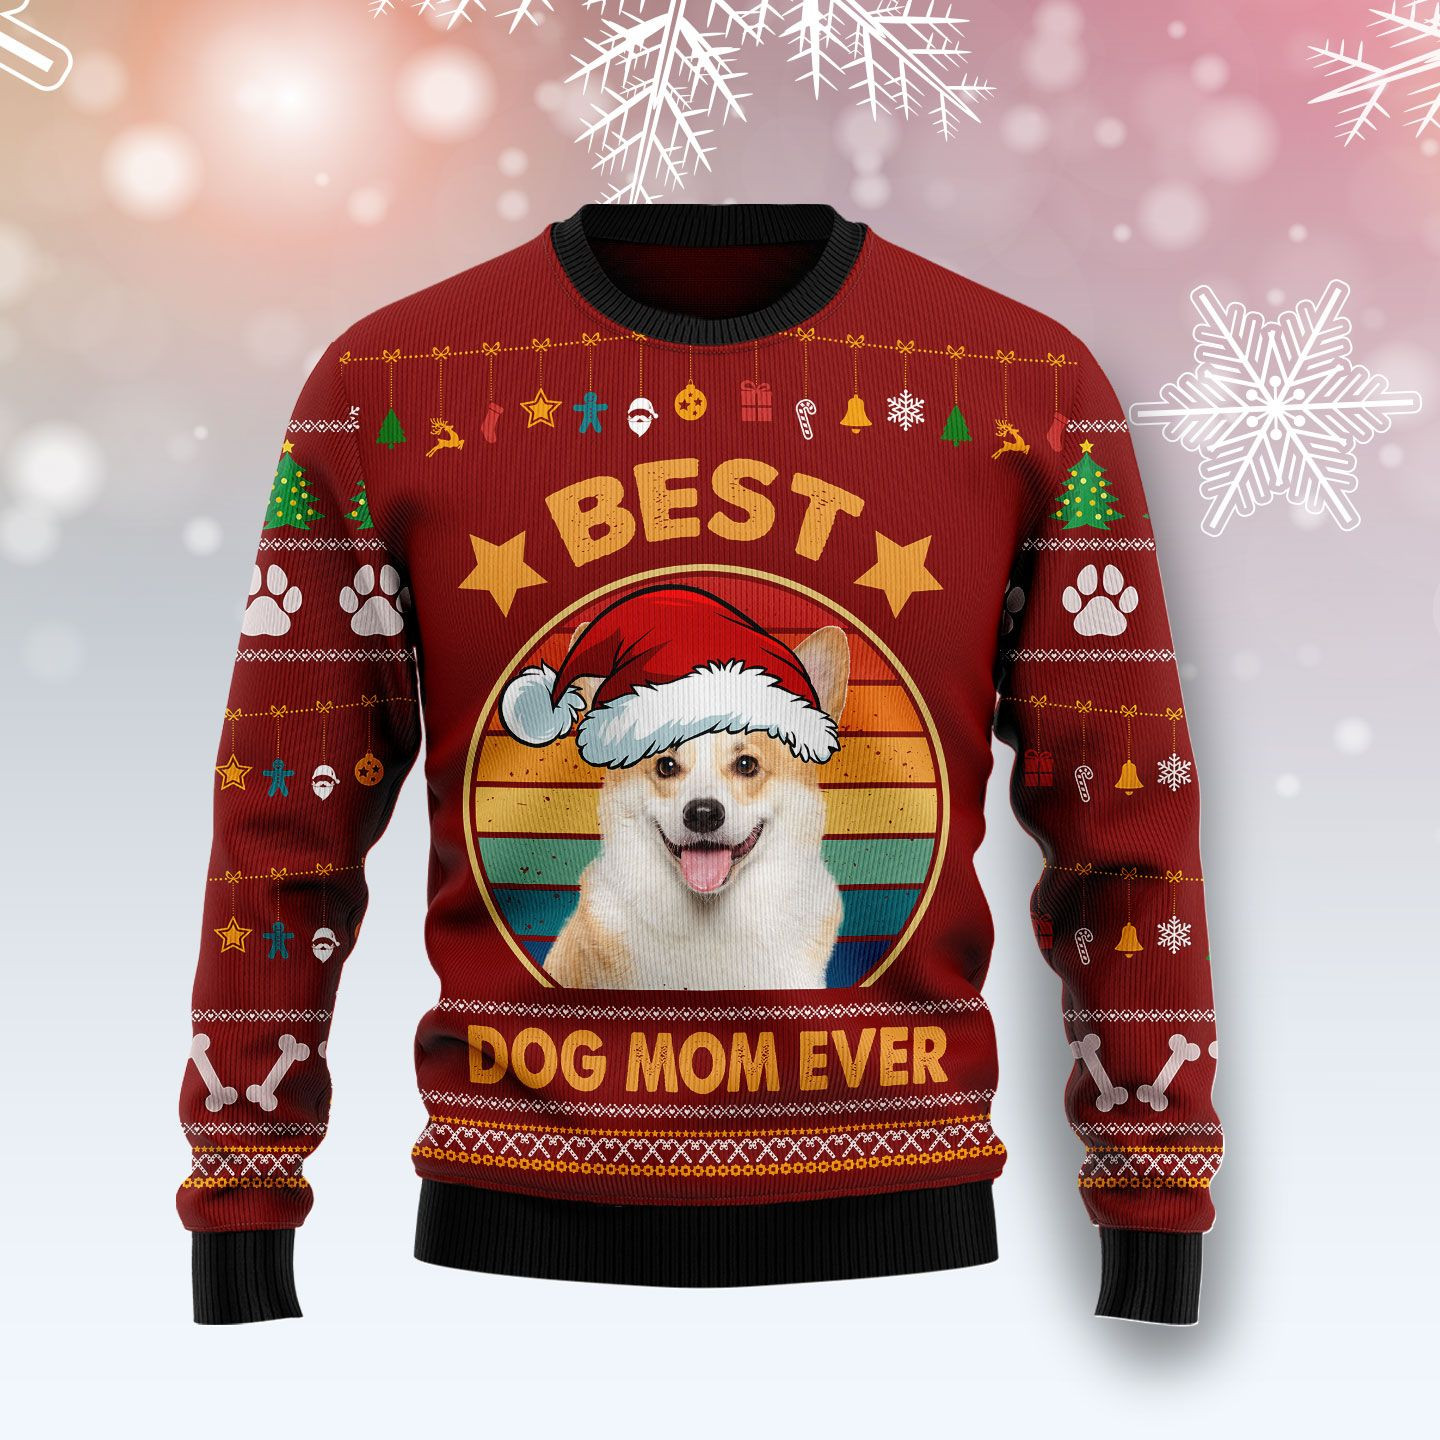 Cardigan Welsh Corgi Best Dog Mom Ever Ugly Christmas Sweater Ugly Sweater For Men Women